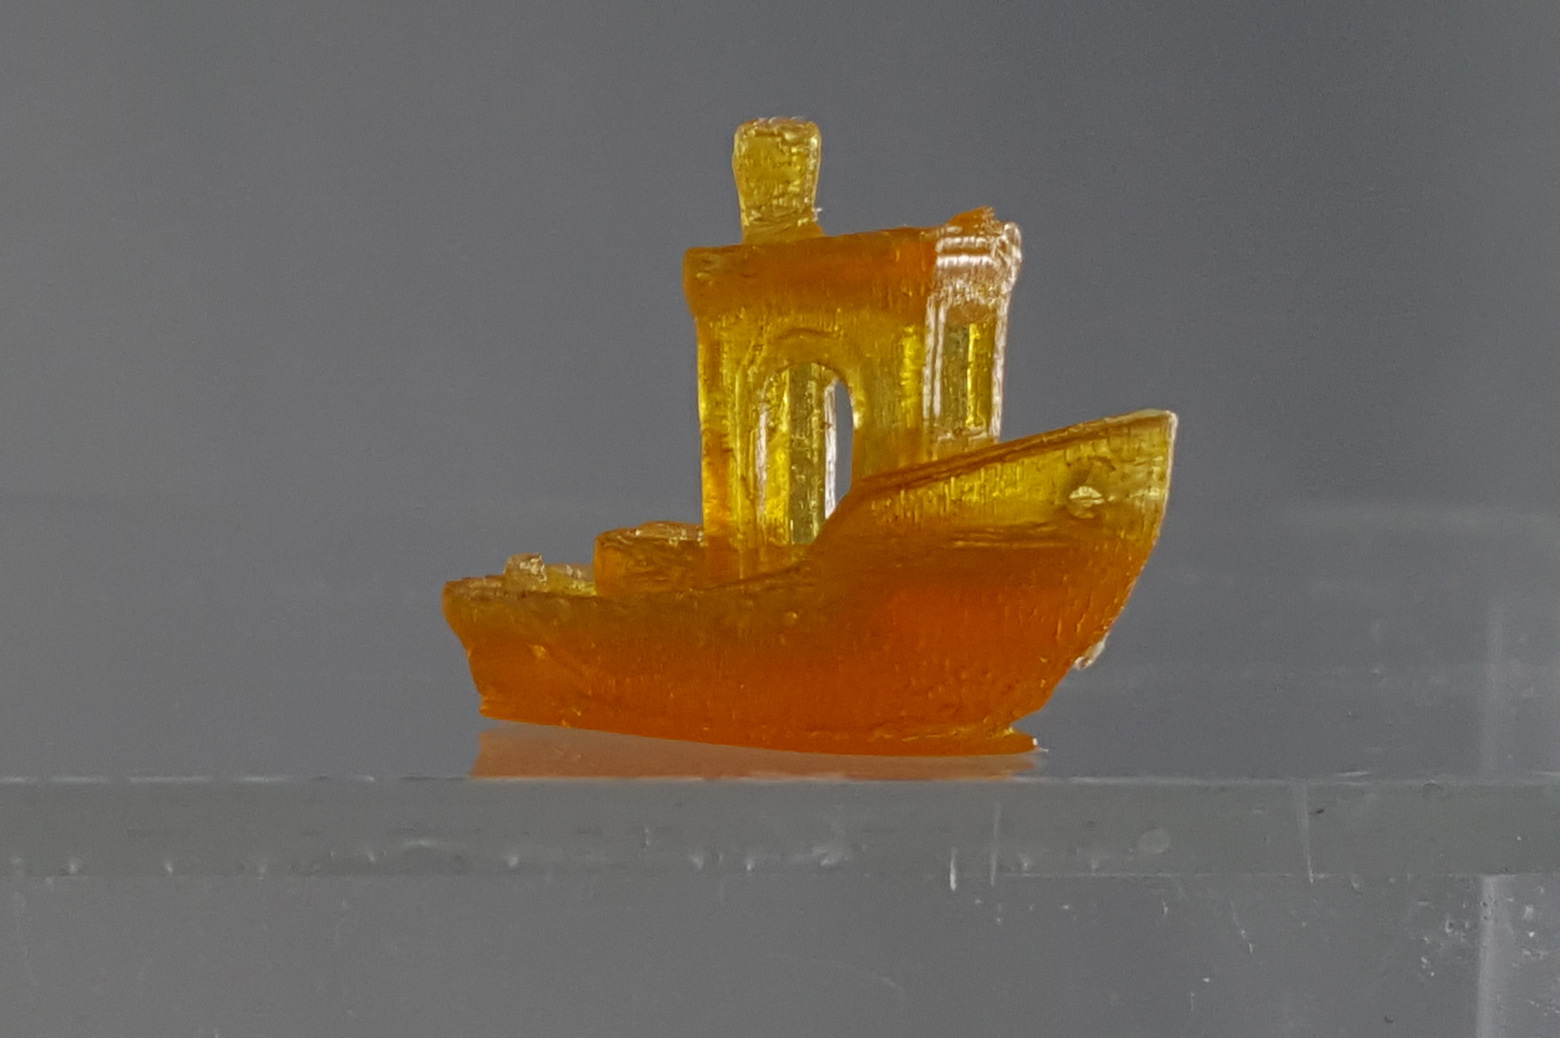 A resin sample created by the new 3D printer